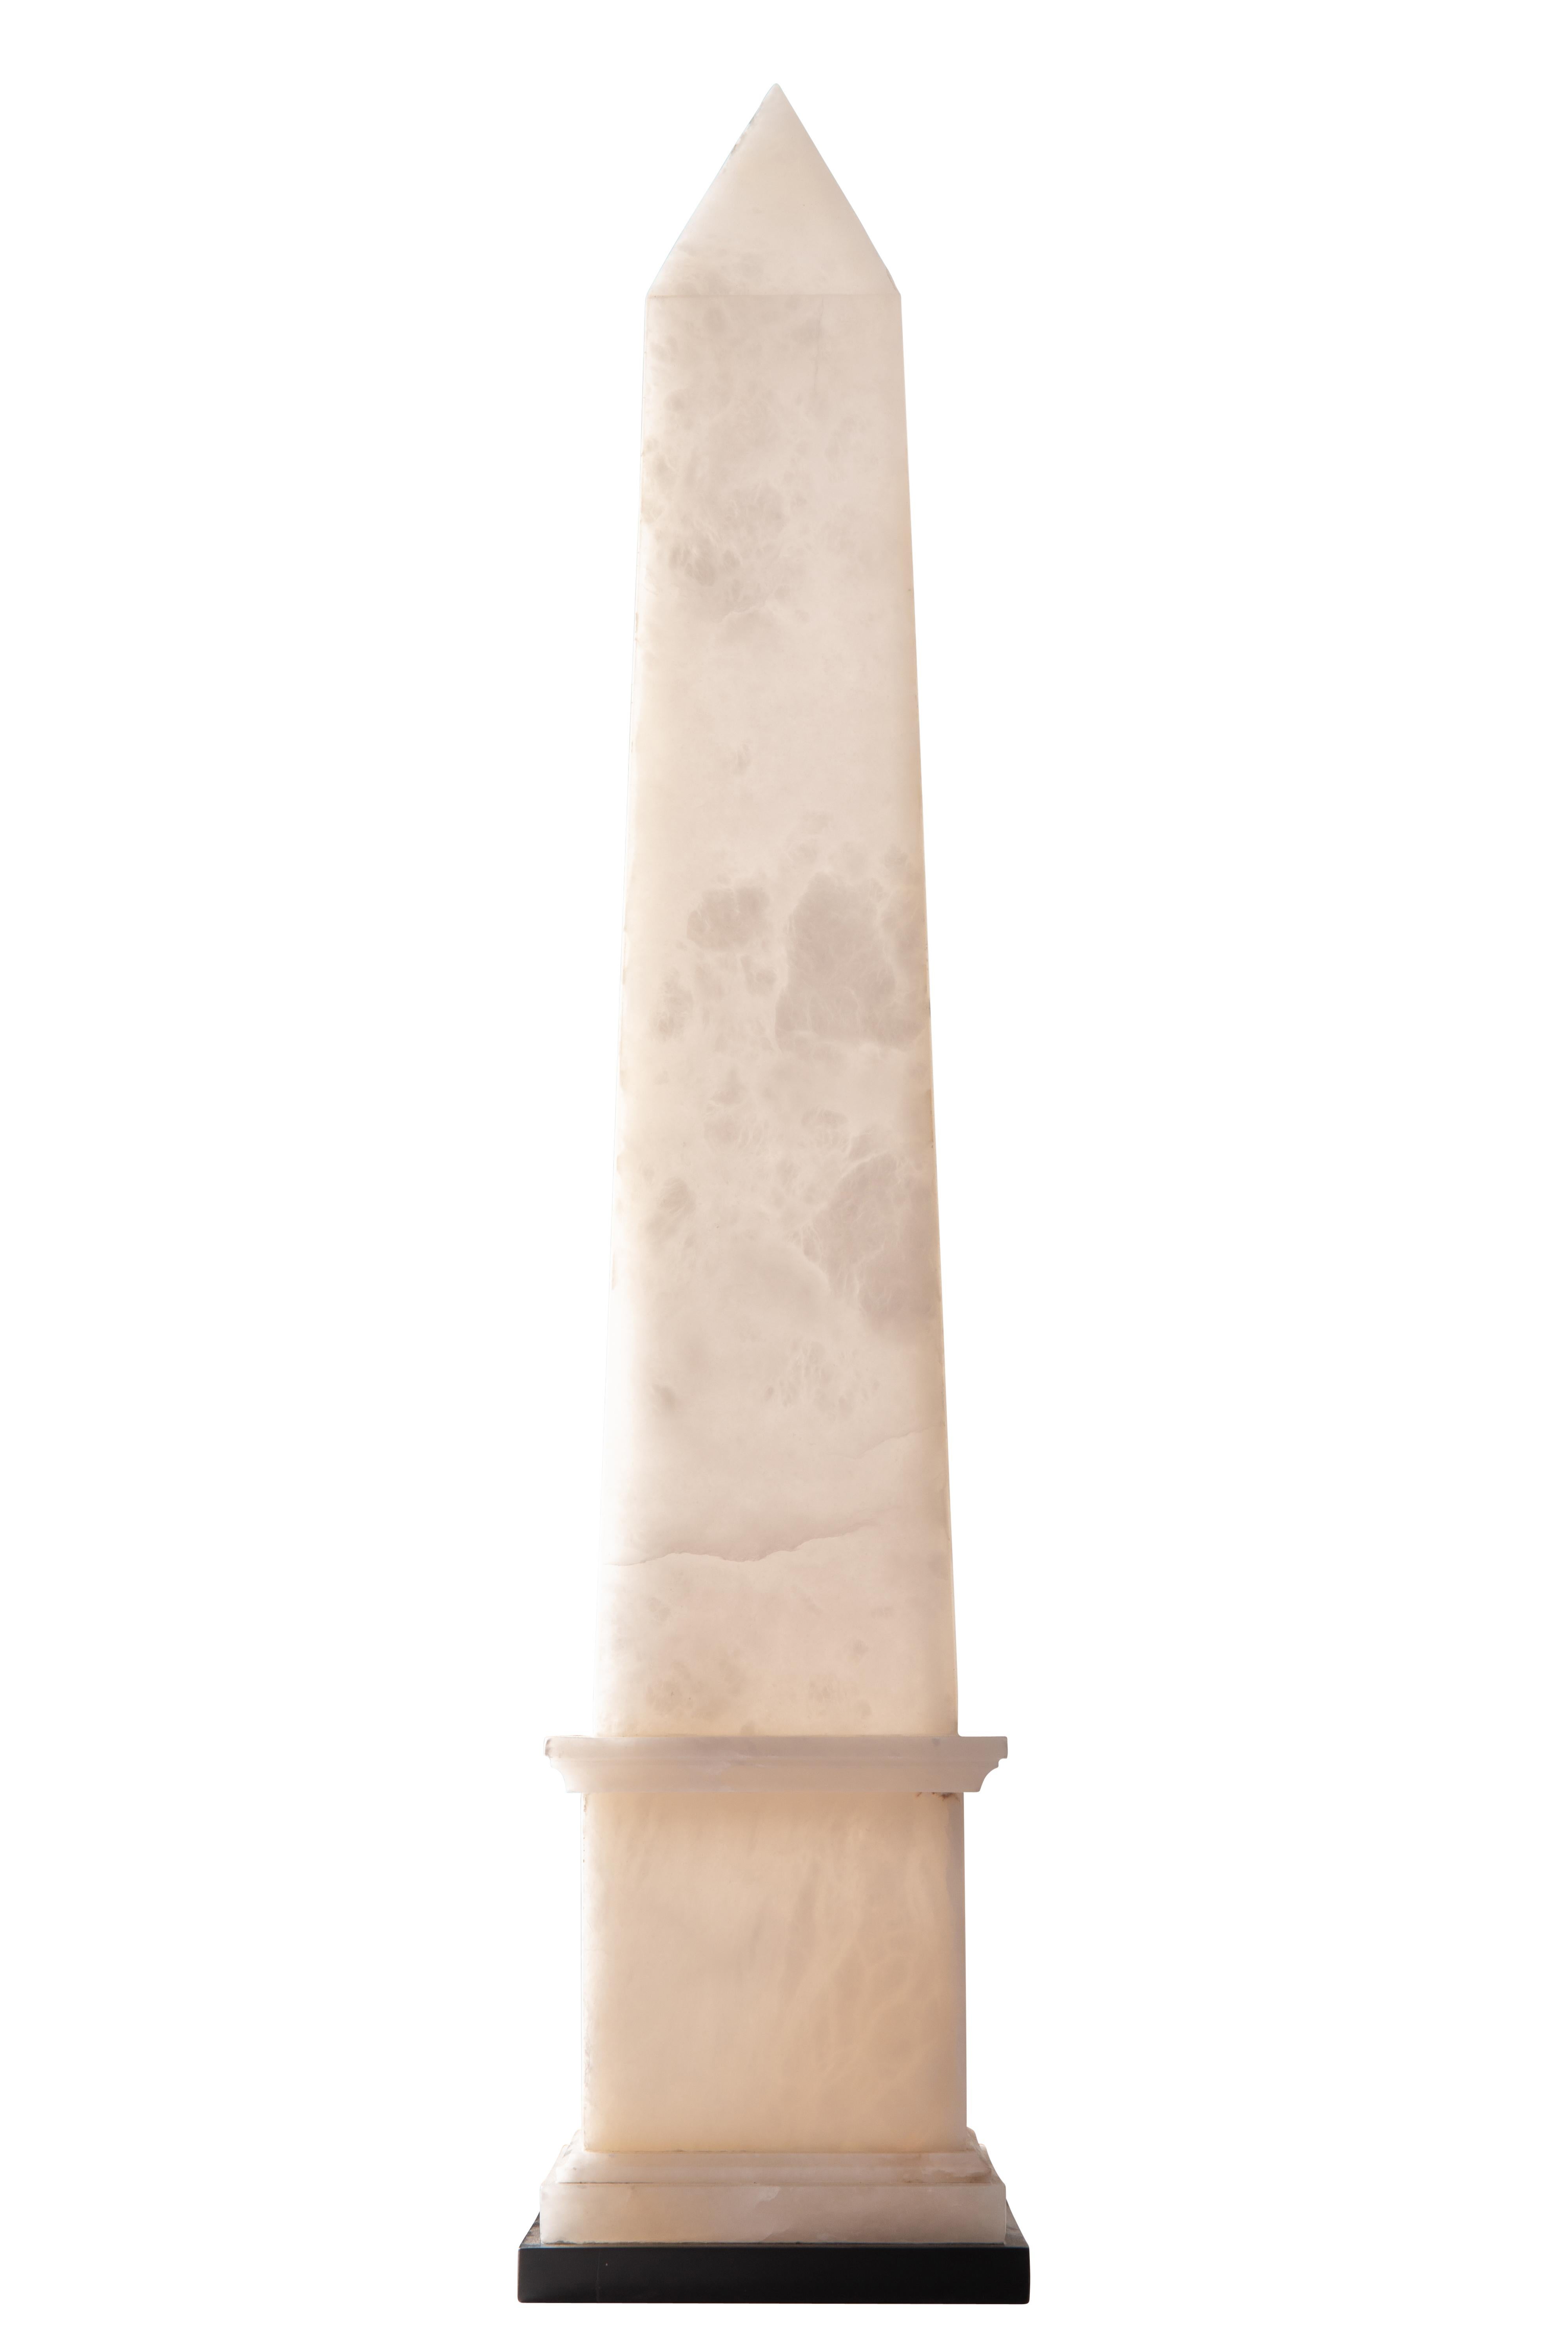 Contempory white alabaster Obelisk lamp designed and produced by Christian Caudron, Meilleur Ouvrier de France 2015*, in his Parisian workshop.

The Obelisk is made of alabaster, a translucent and veined matte stone and sits on a black marble